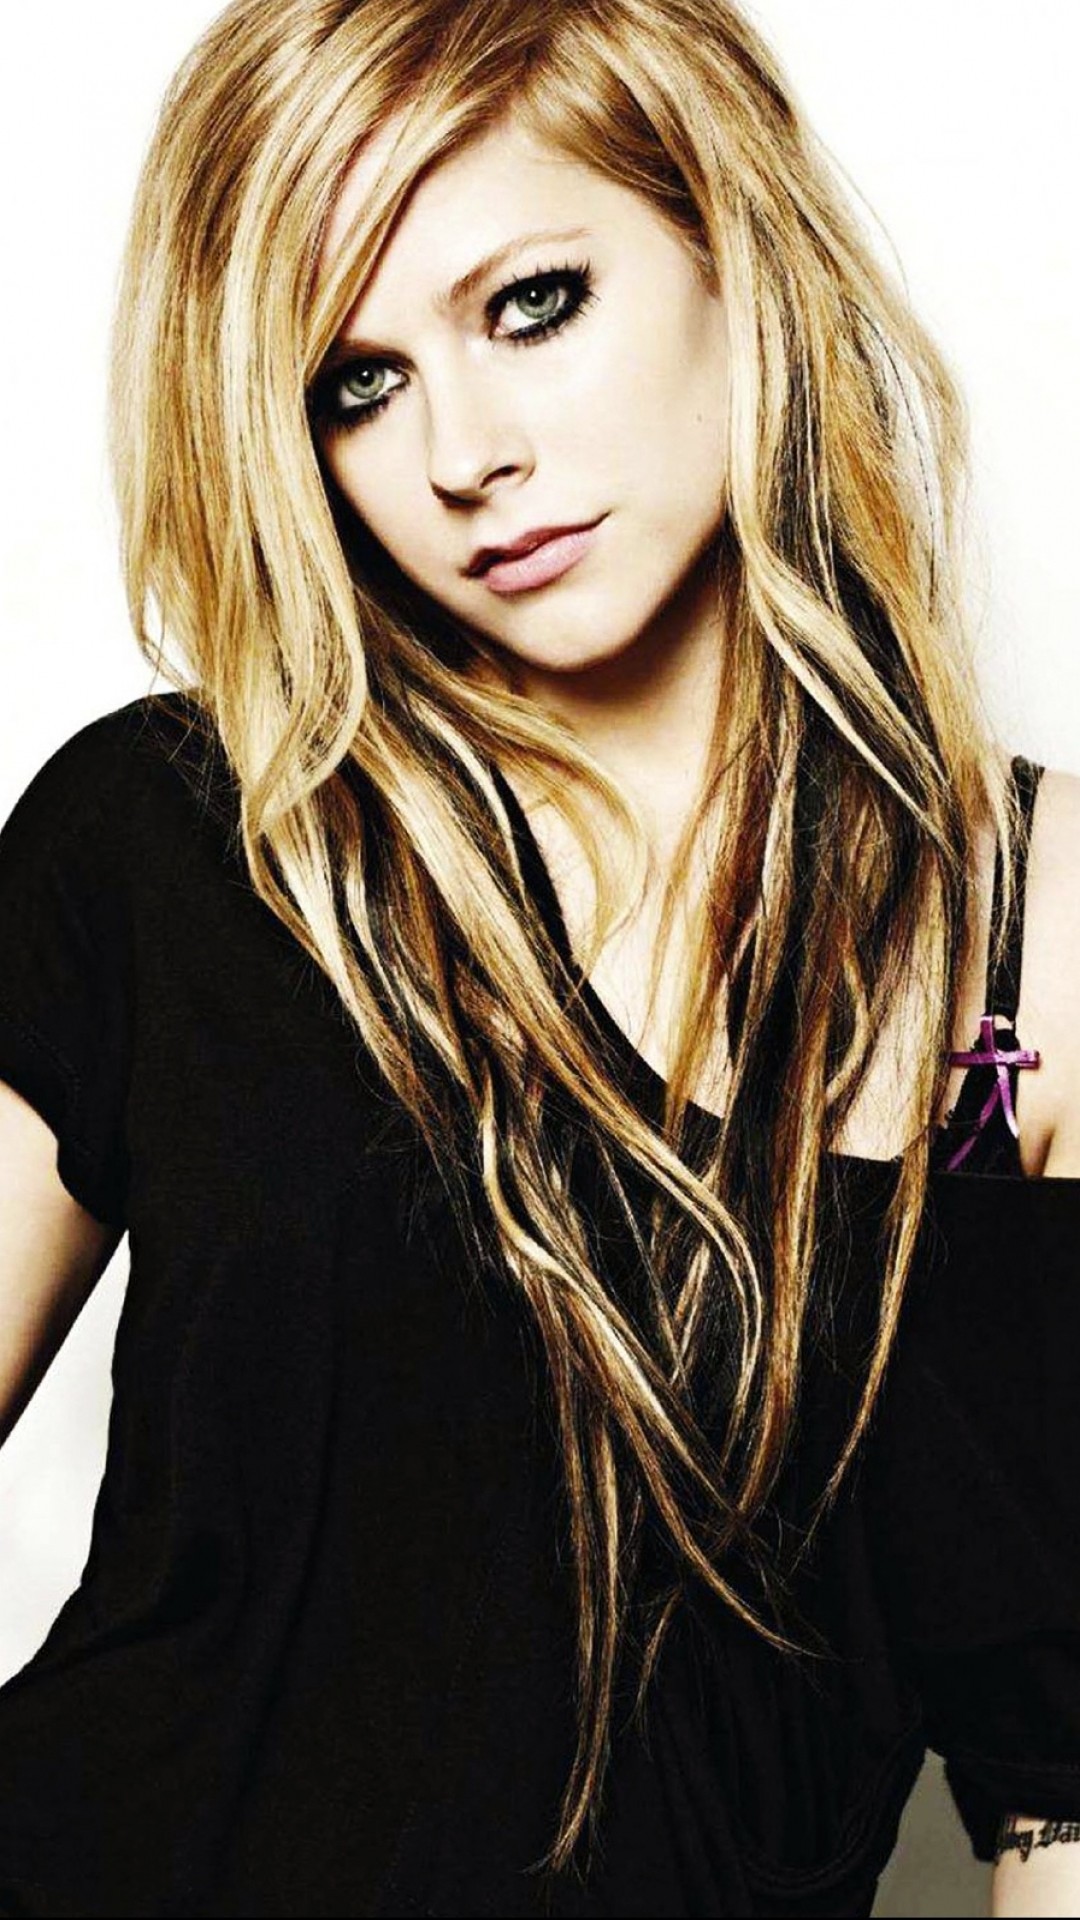 avril lavigne wallpaper,hair,blond,hairstyle,face,hair coloring